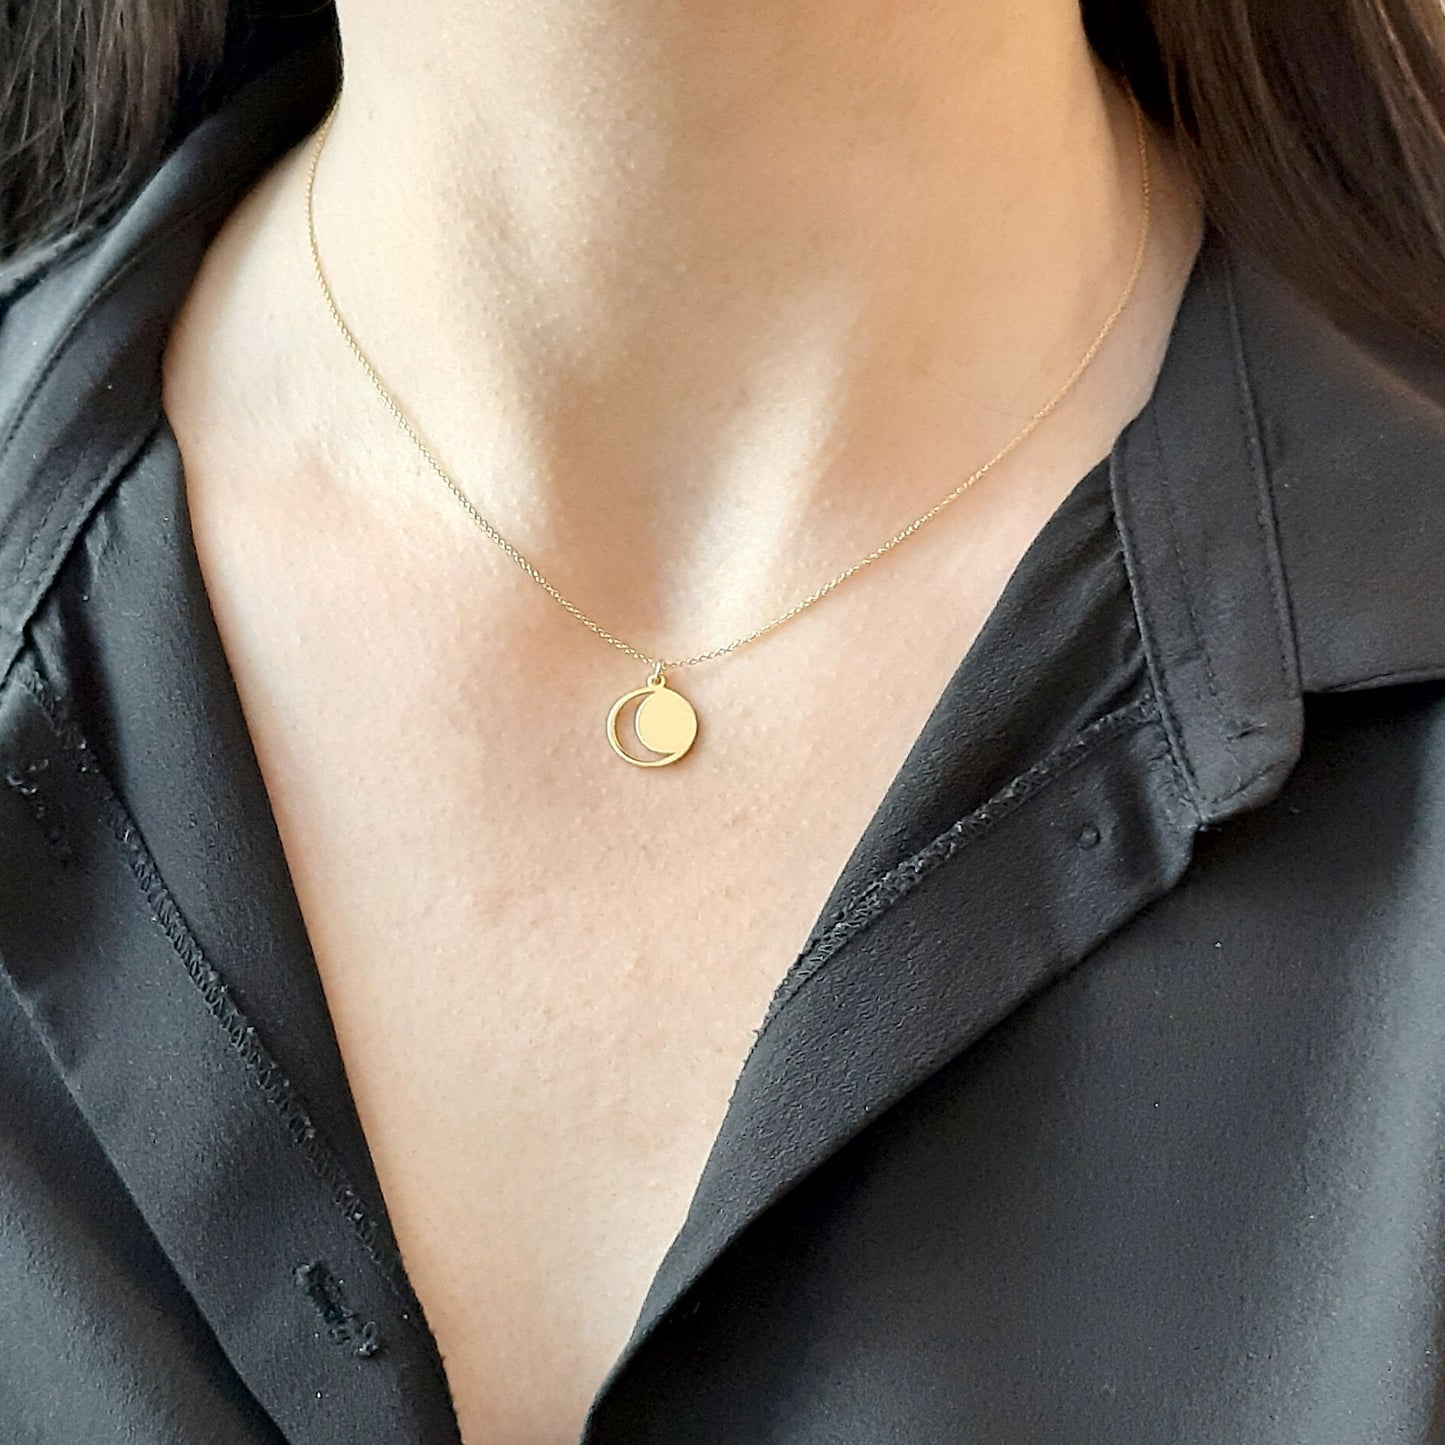 Crescent Moon Necklace in 14k Solid Gold , Moon Phase Necklace for Women , Yellow, Rose or White Gold, 14k gold necklace  gift for her